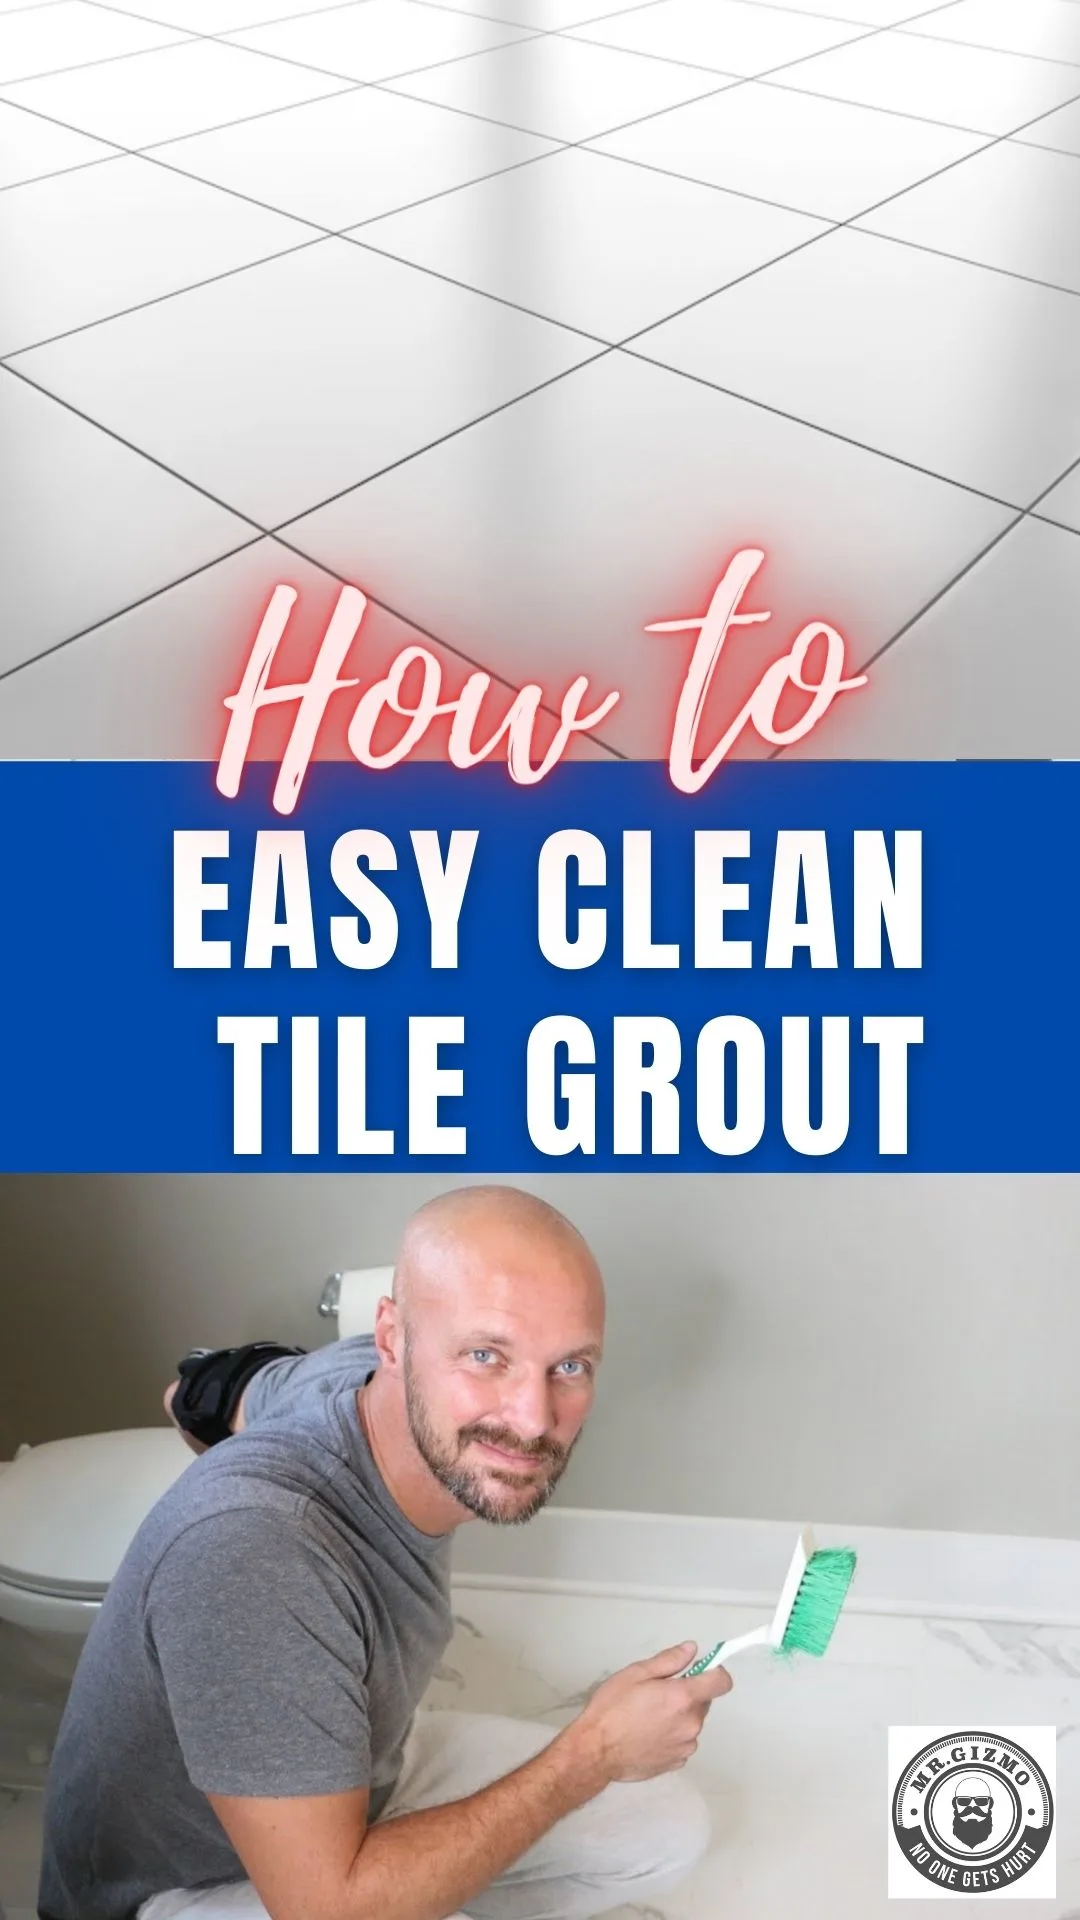 https://babygizmo.com/wp-content/uploads/2023/05/How-to-clean-tile-grout-Pin.jpg.webp